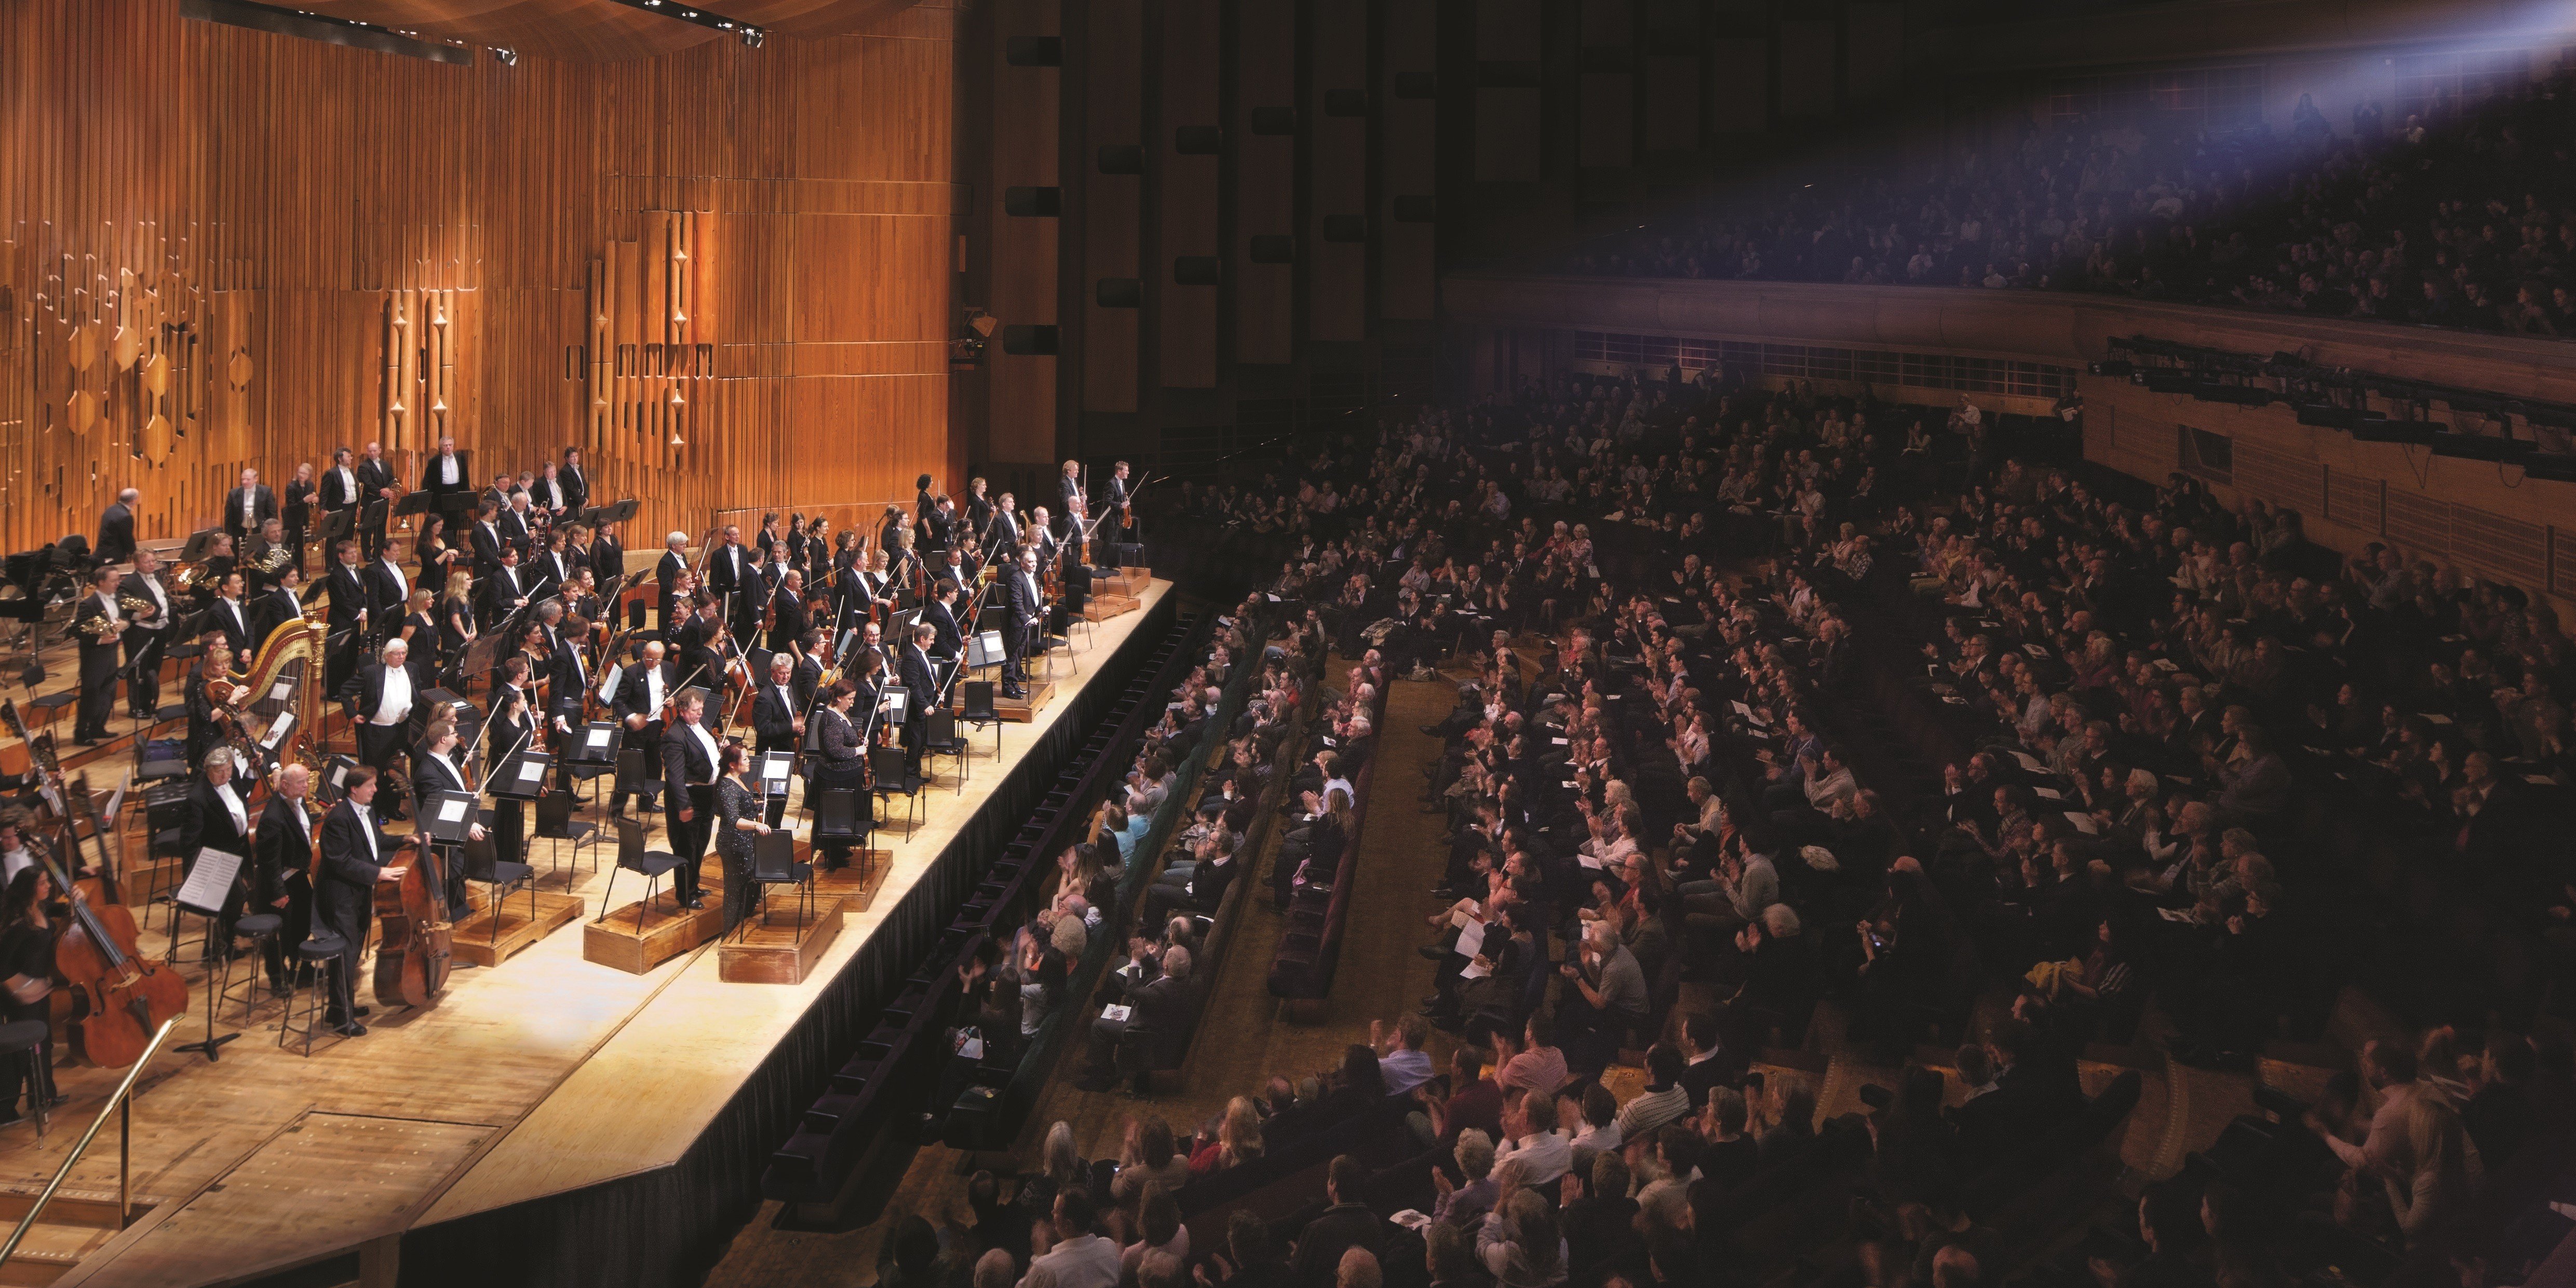 The London Symphony Orchestra will be performing on three evenings to mark the Hong Kong Cultural Centre’s 30th anniversary on September 22, 24 and 25. Photo: Igor Emmerich